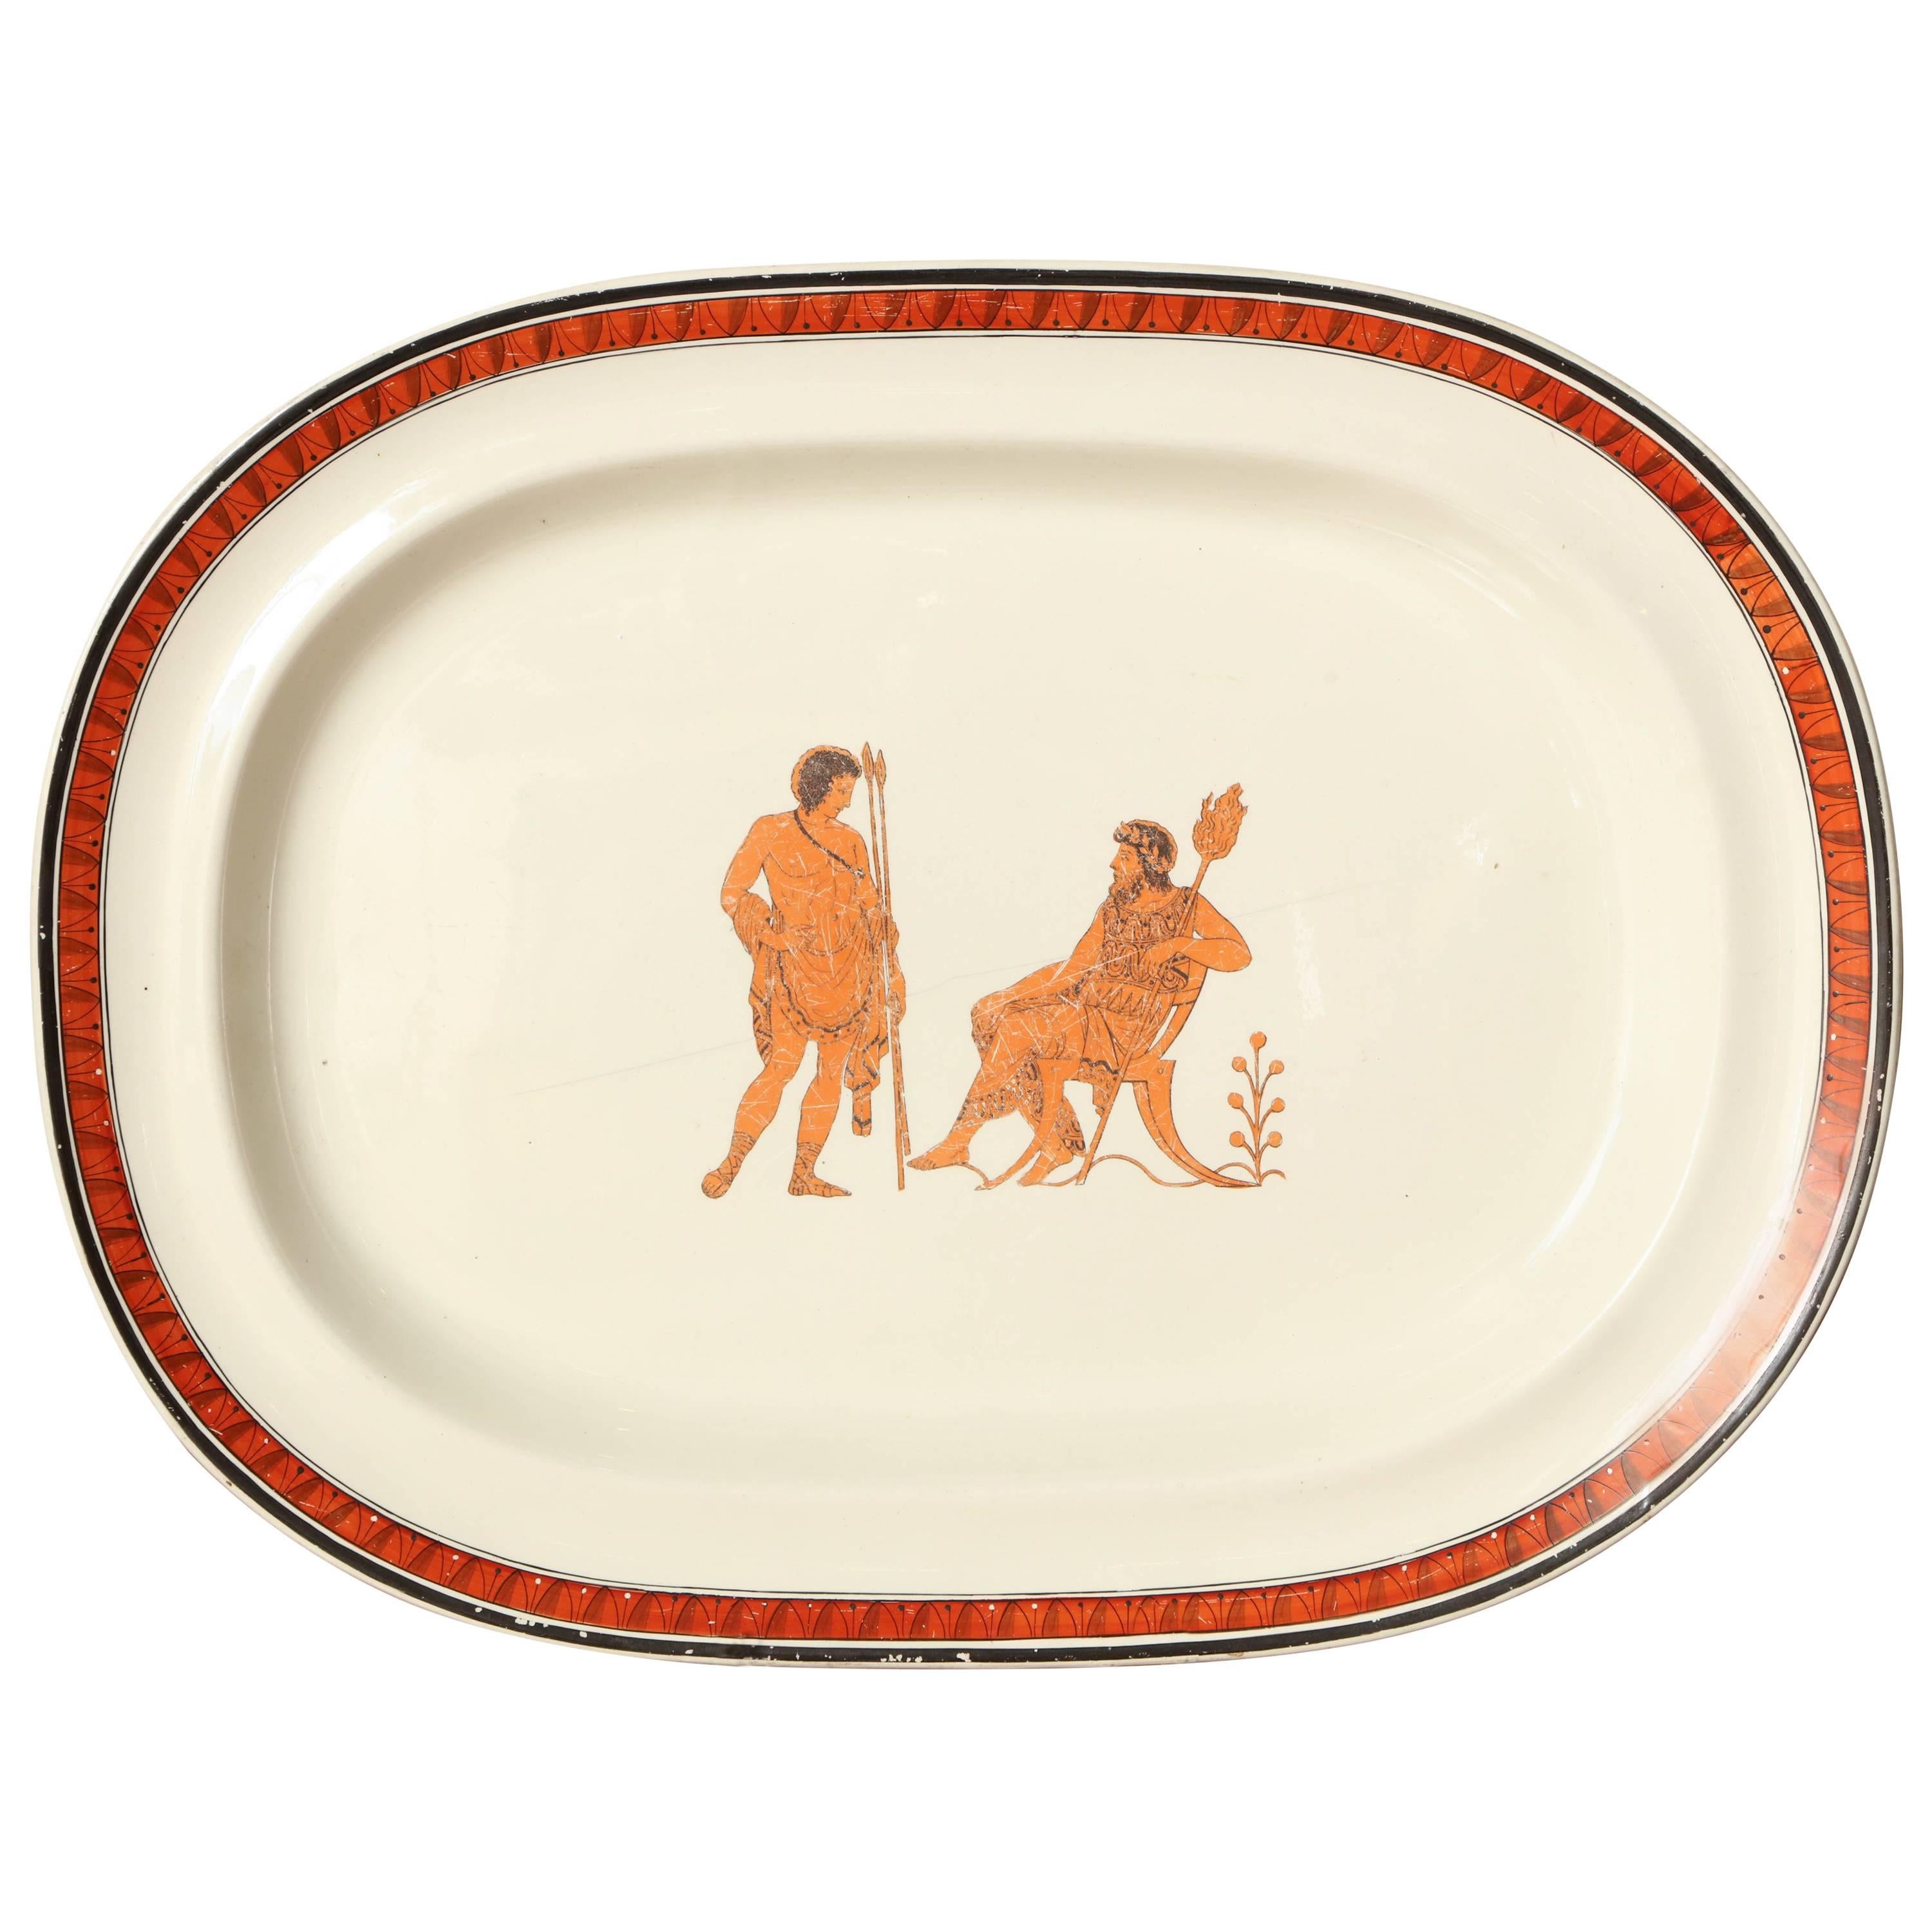 19th Century Creamware Platter in the Etruscan Style For Sale